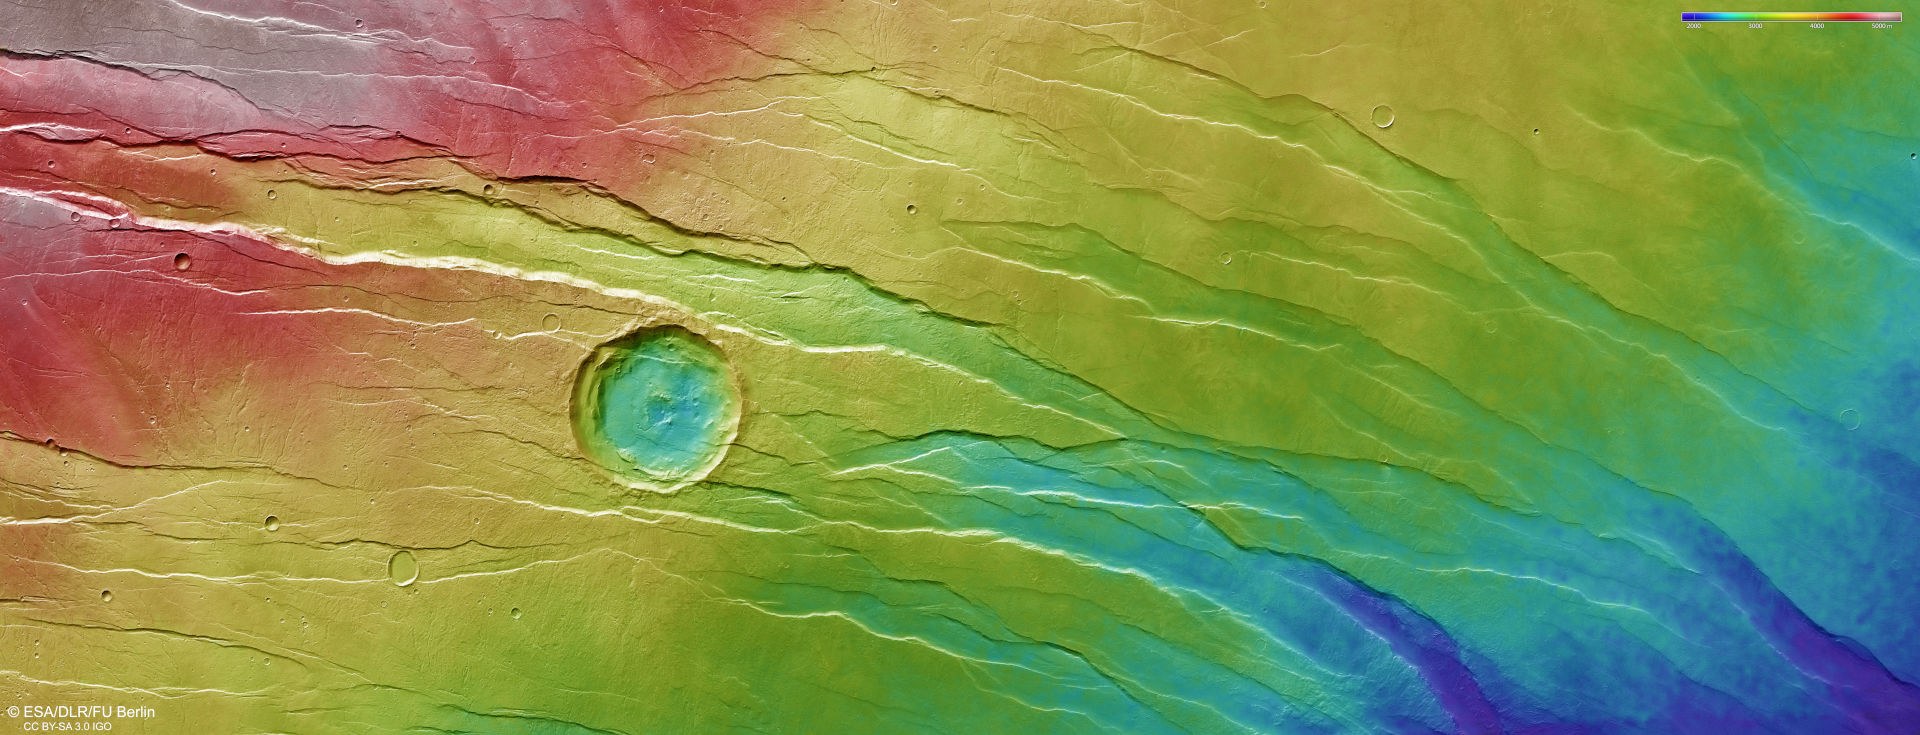 Topographic image map of part of the Tantalus Fossae